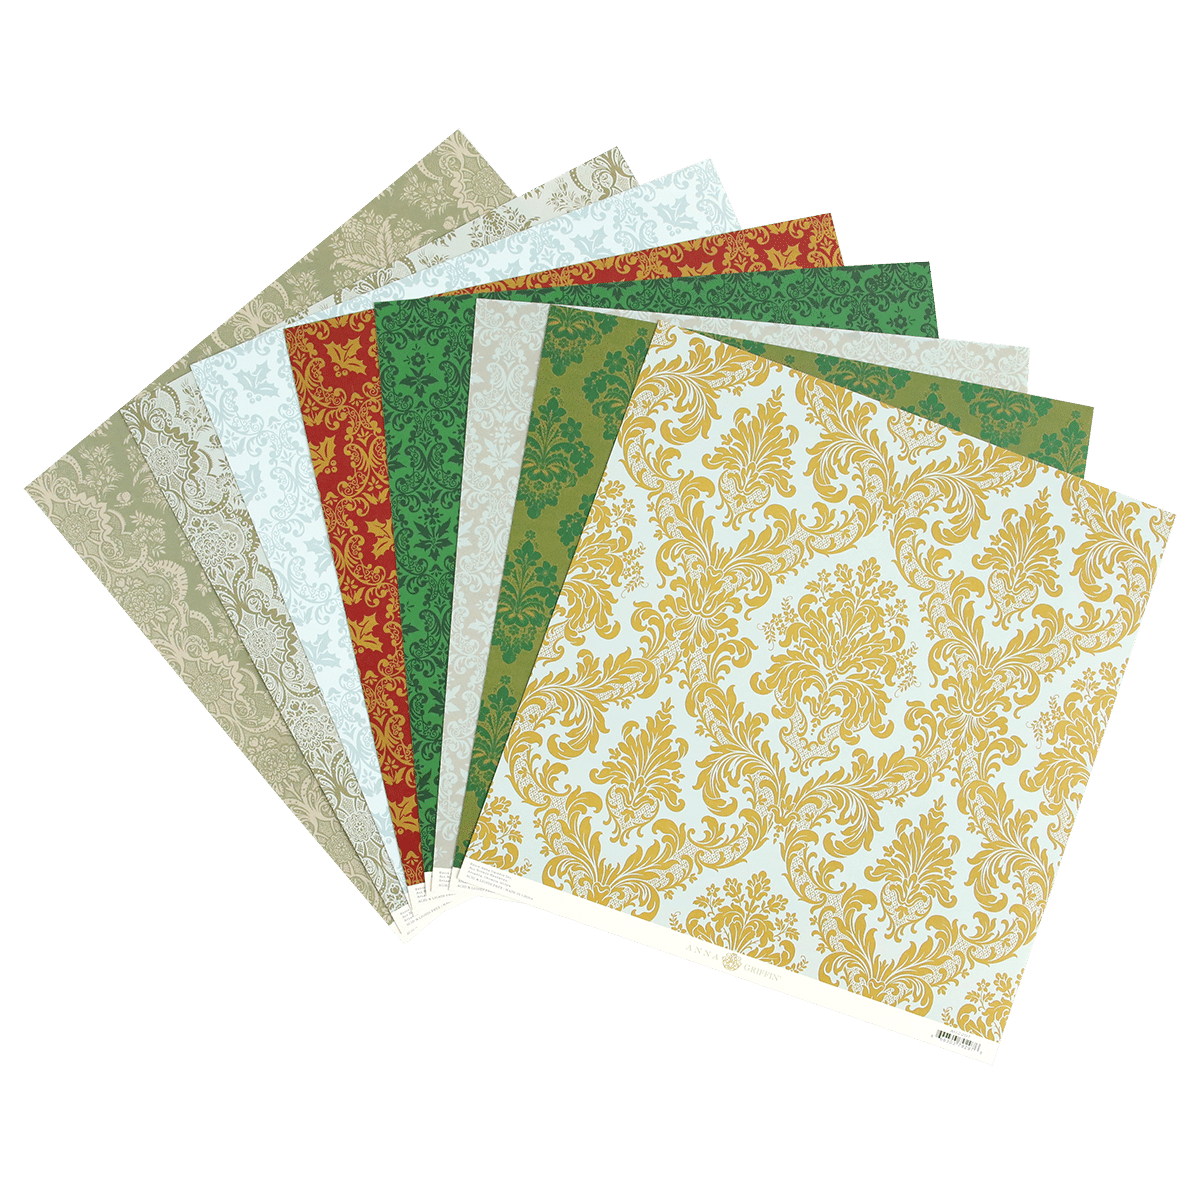 a set of Christmas Damask 12x12 Cardstock papers with green, red and gold designs.